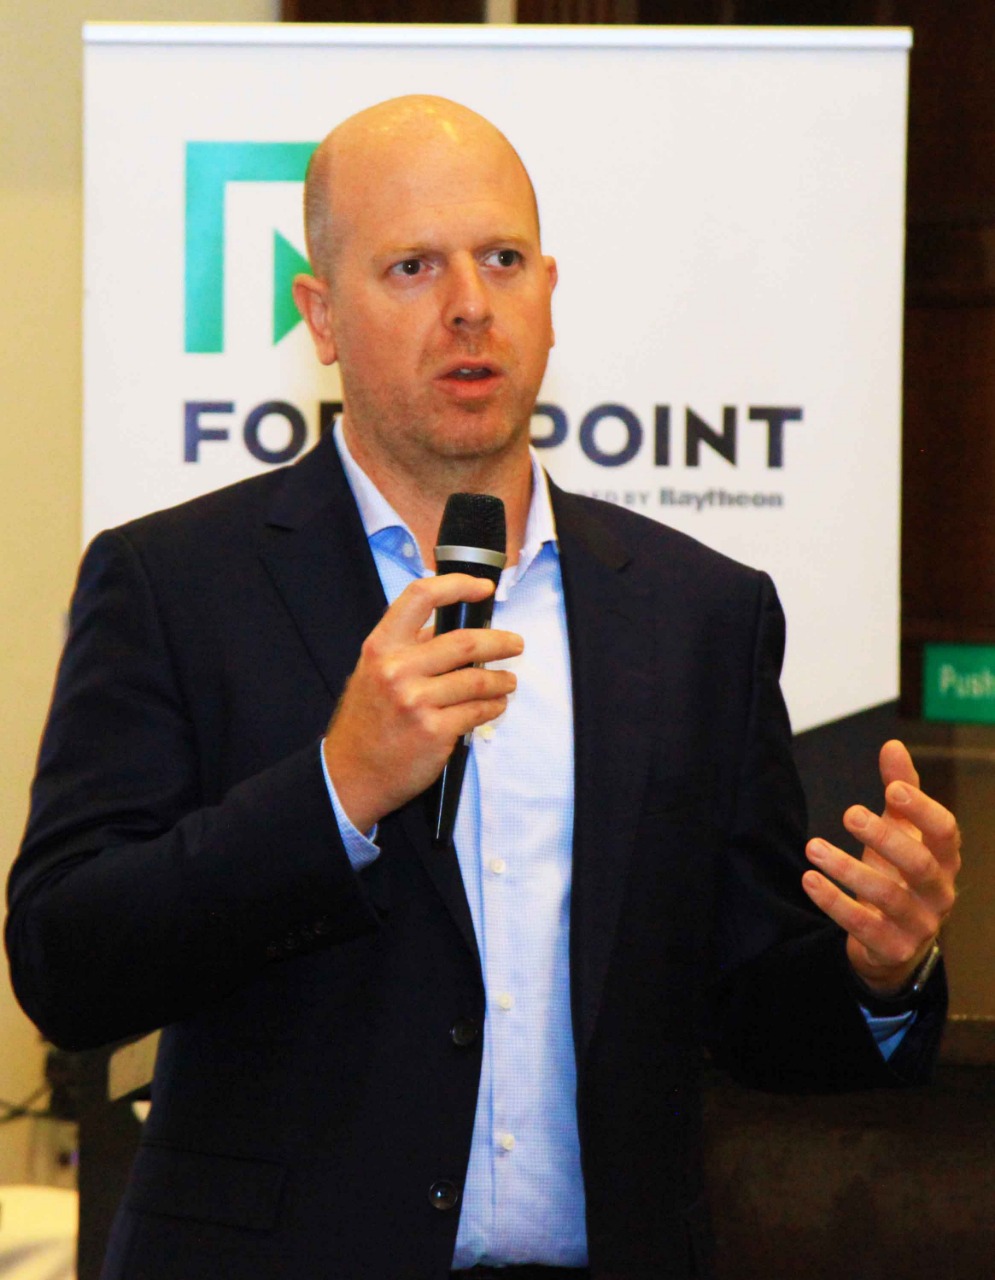 Forcepoint banks on human centric cyber security approach